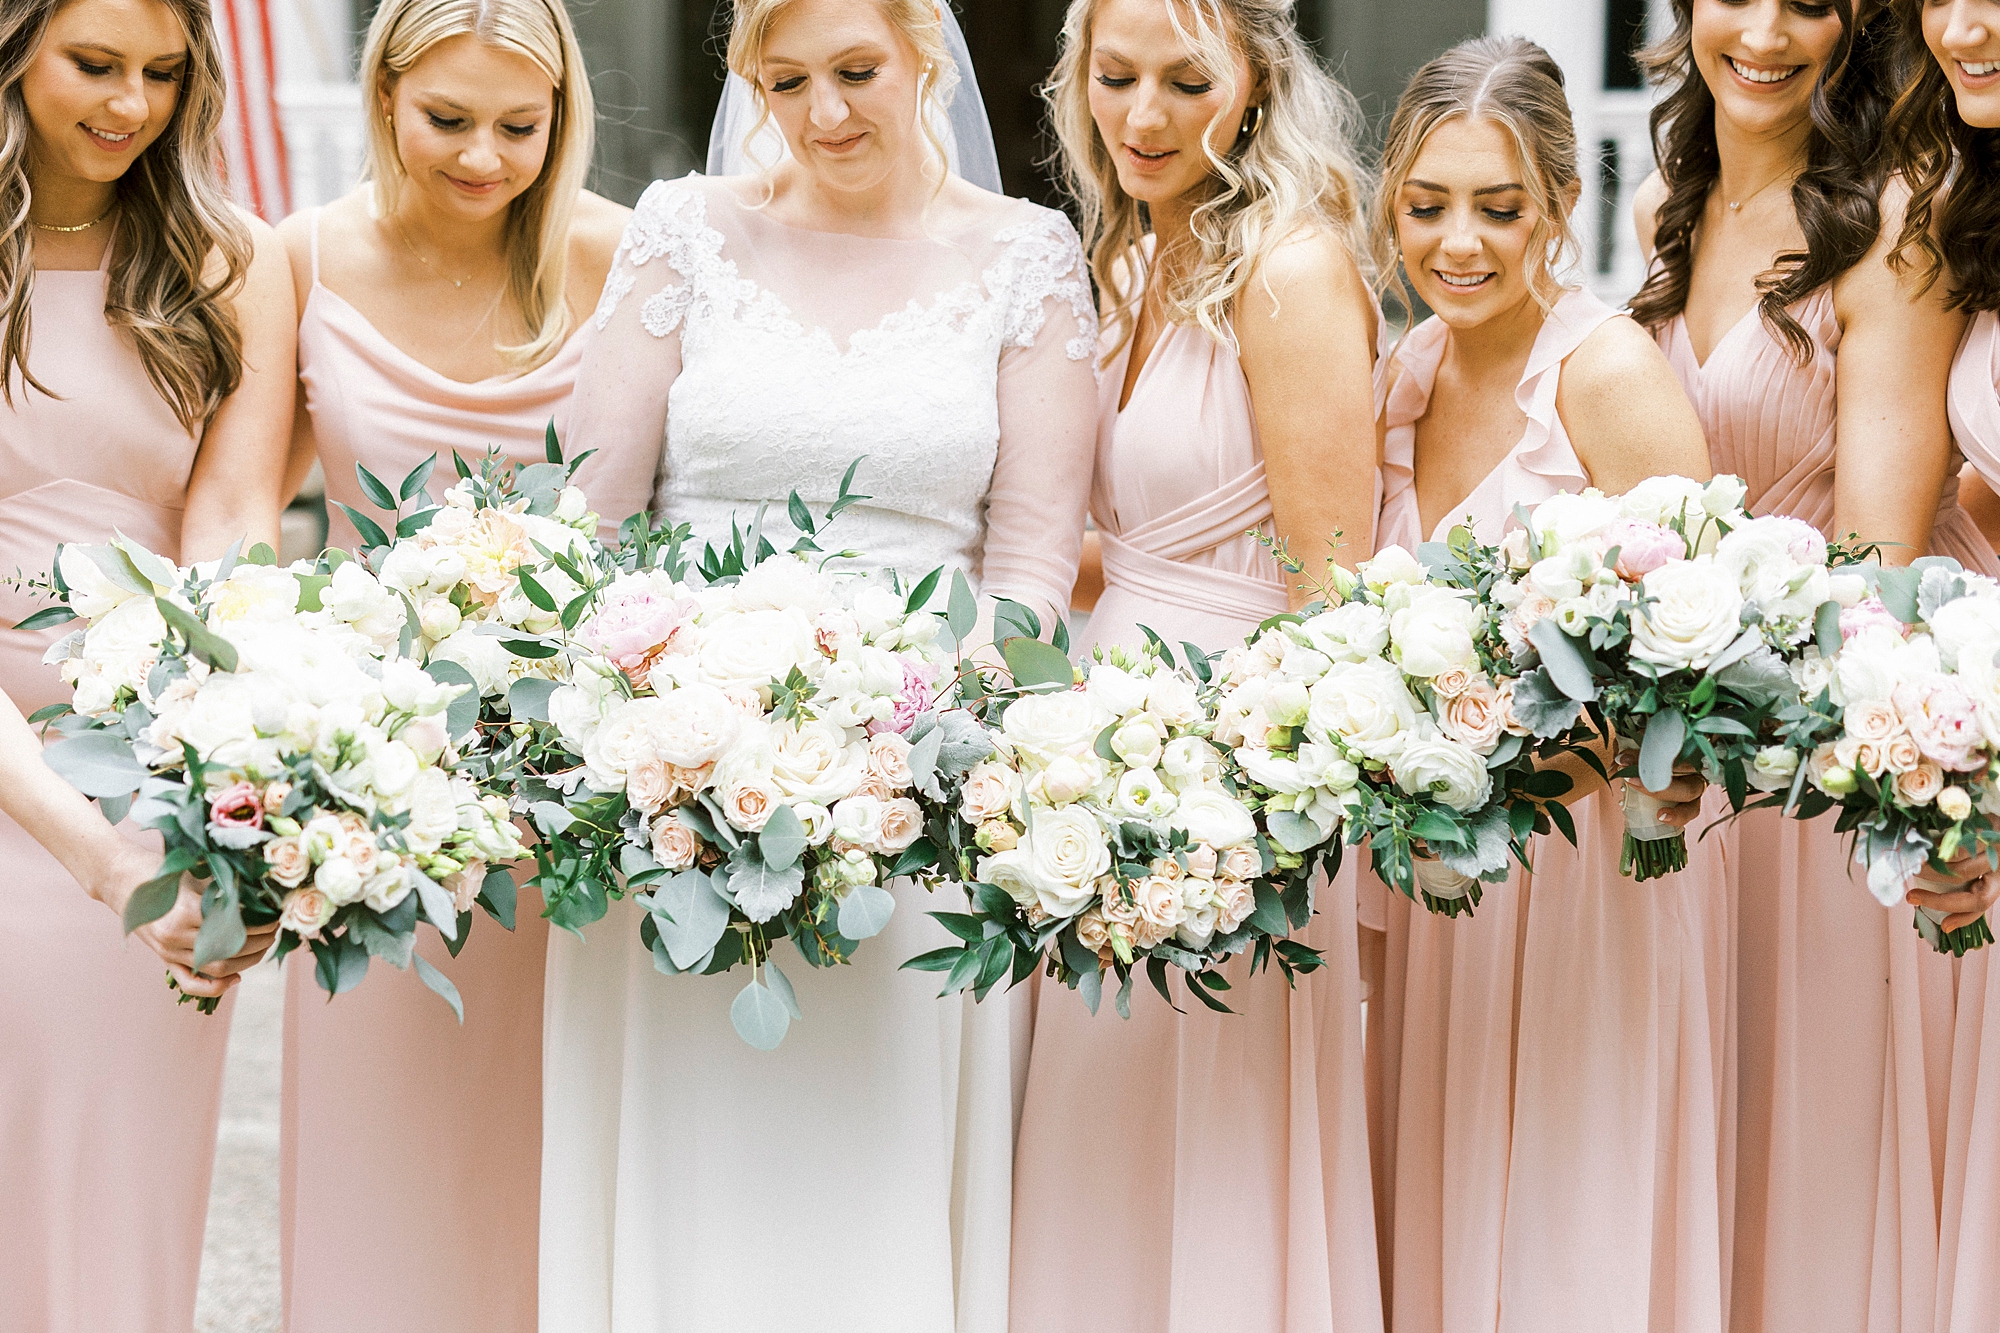 bride and bridesmaids hold bouquets of white and pink flowers